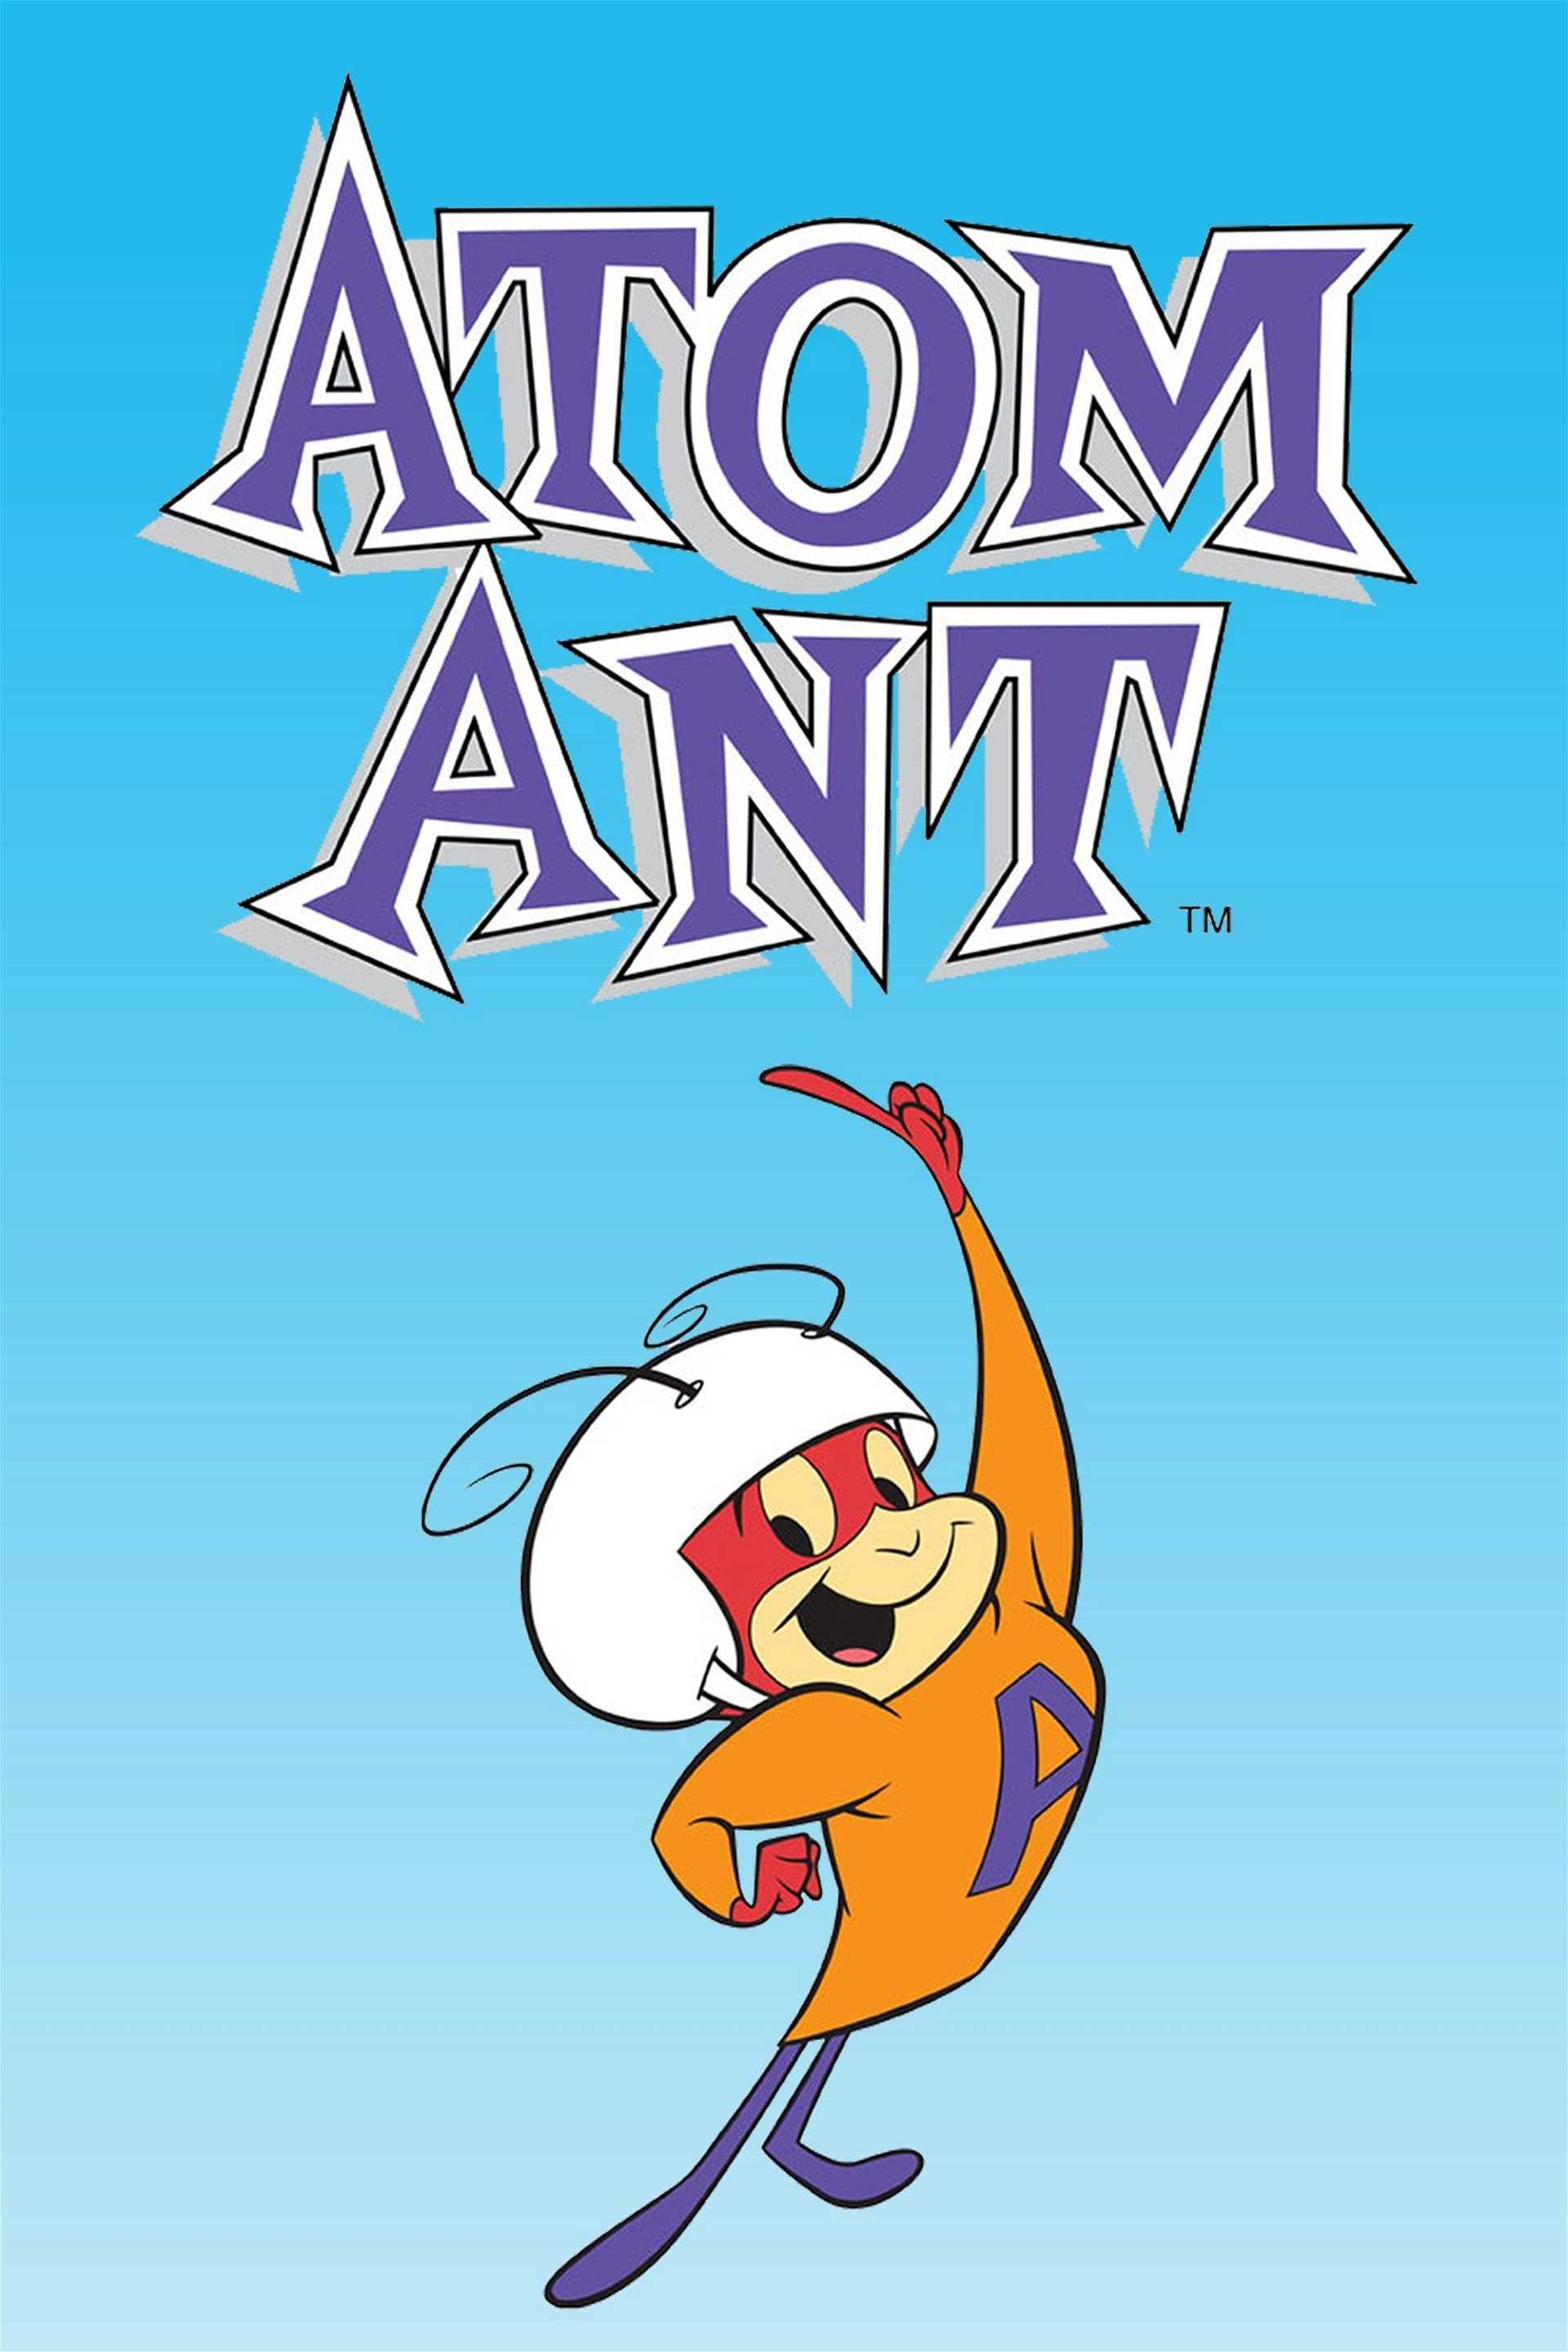 Atomic Ant in streaming